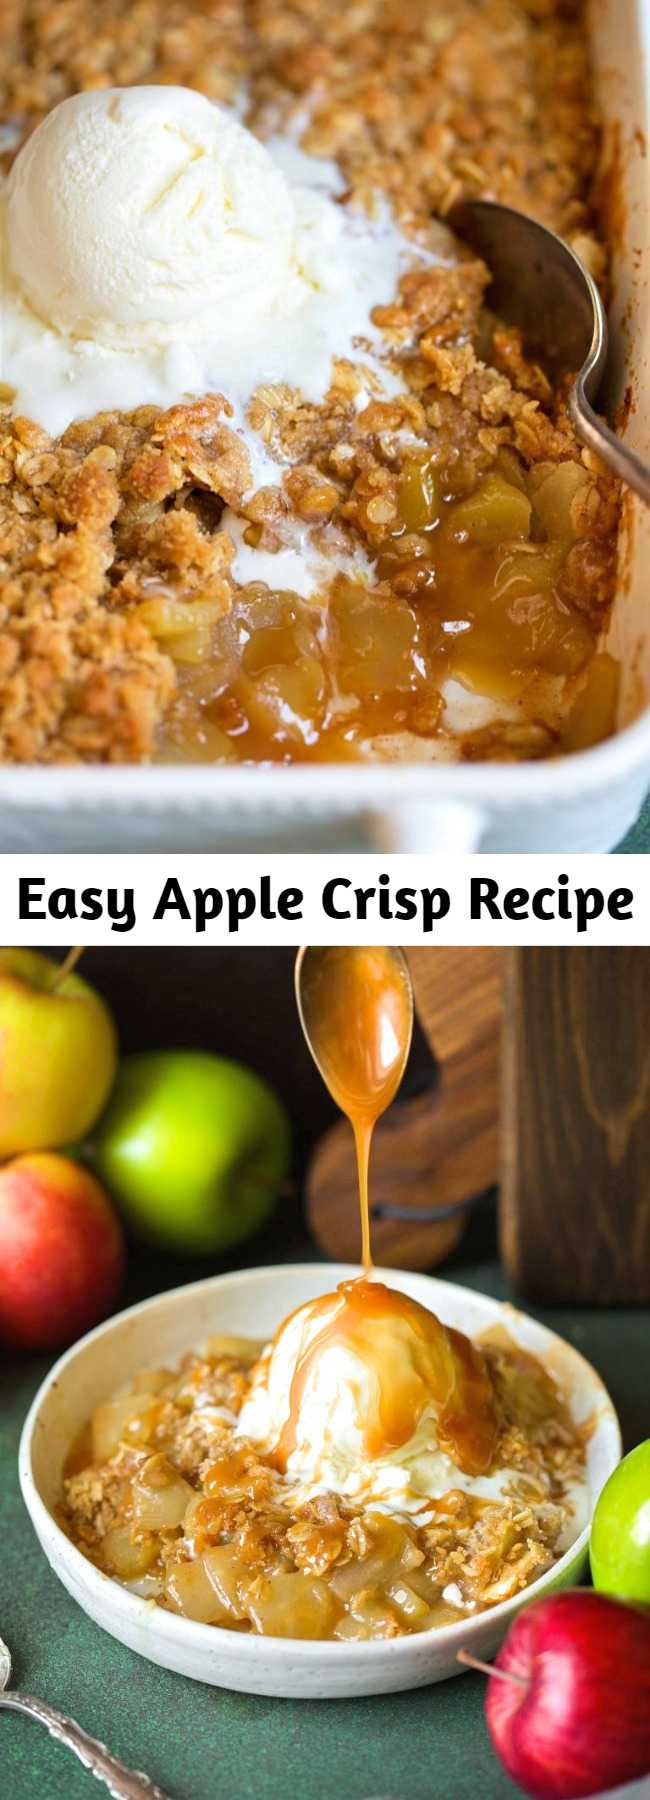 Easy Apple Crisp Recipe - this is hands down the best apple crisp recipe you’ll try! Definitely a family favorite. It's brimming with fresh juicy apples, it has the perfect amount of cinnamon sweetness, and that crisp buttery oat topping is what dreams are made of! #applecrisp #apple #dessert #recipe